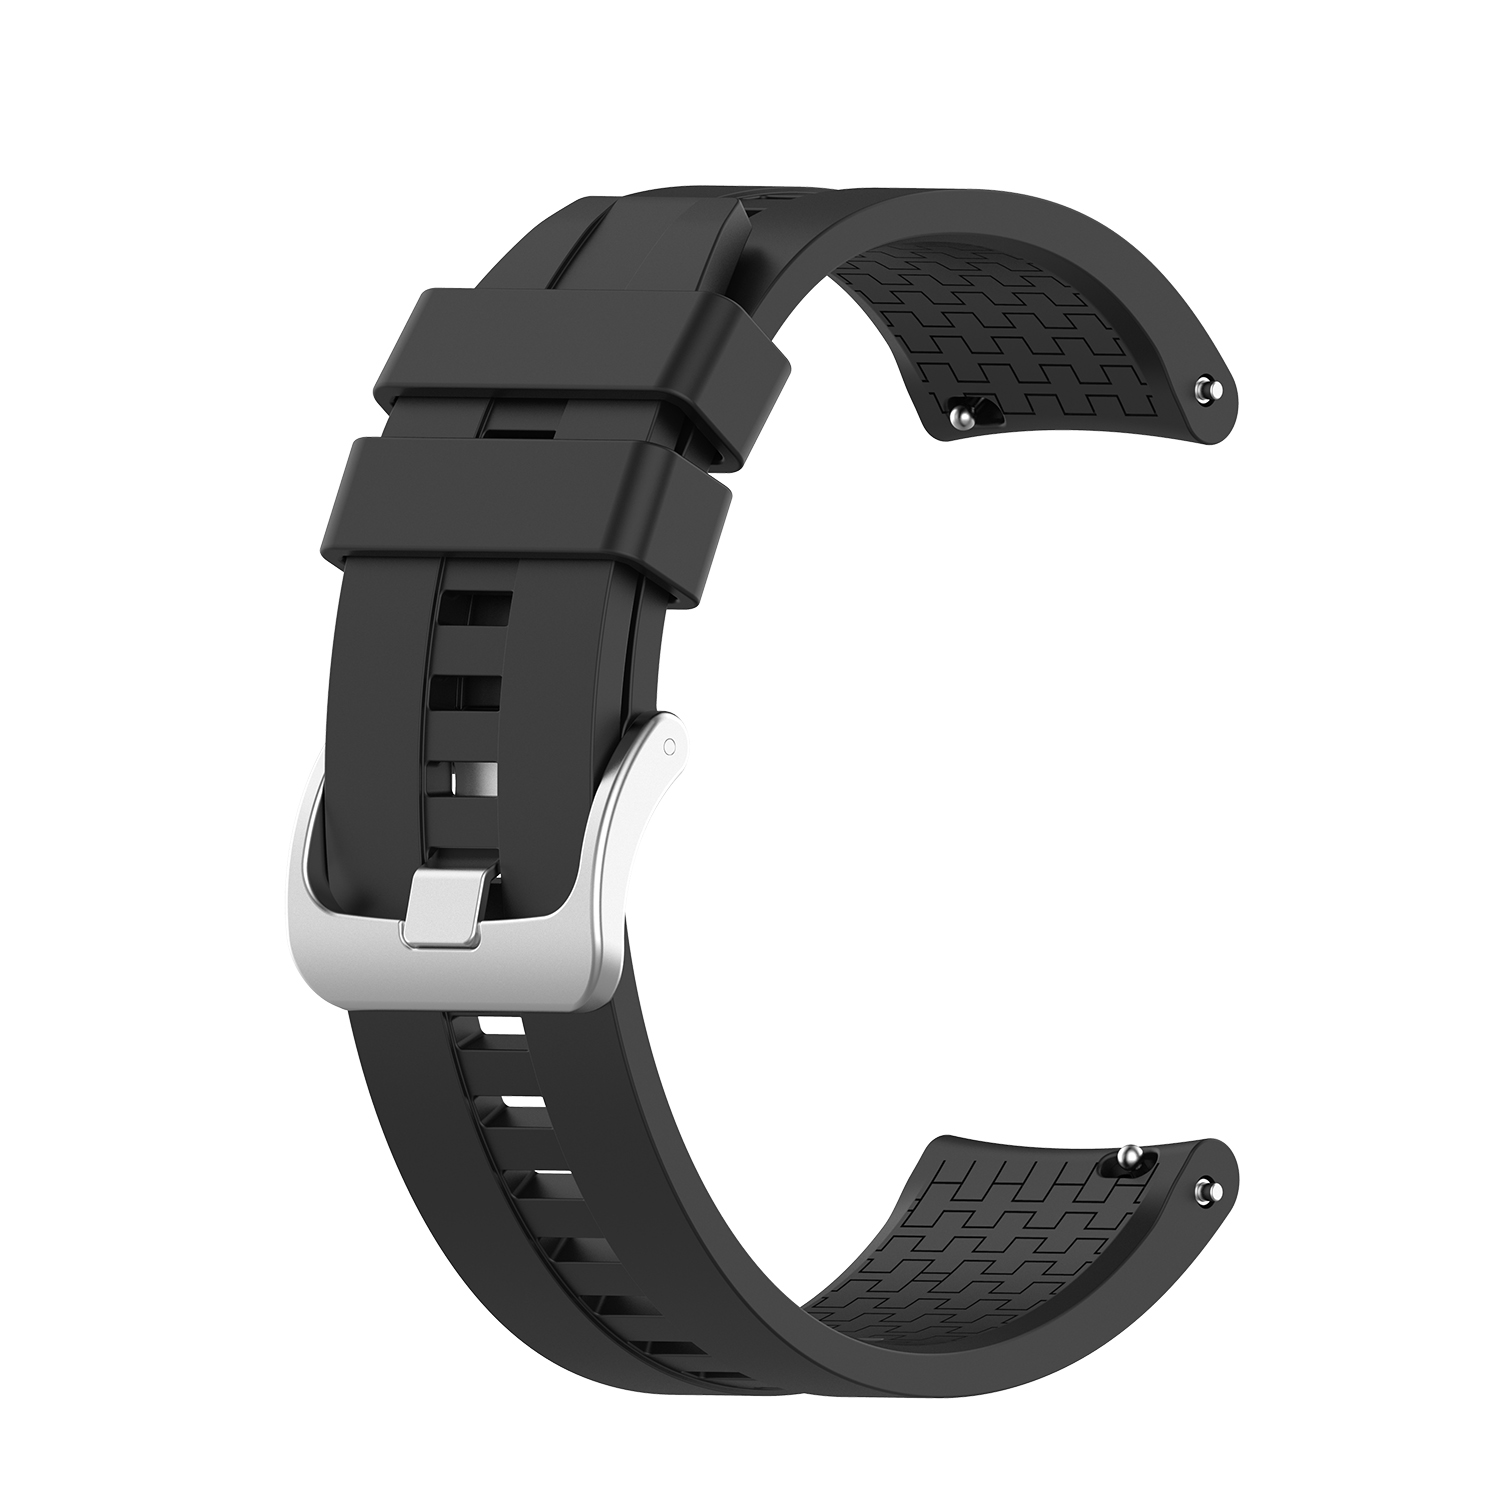 Bakeey Comfortable Breathable Sweatproof Soft Silicone Watch Band Strap Replacement for BlitzWolf BW-AT3C 1